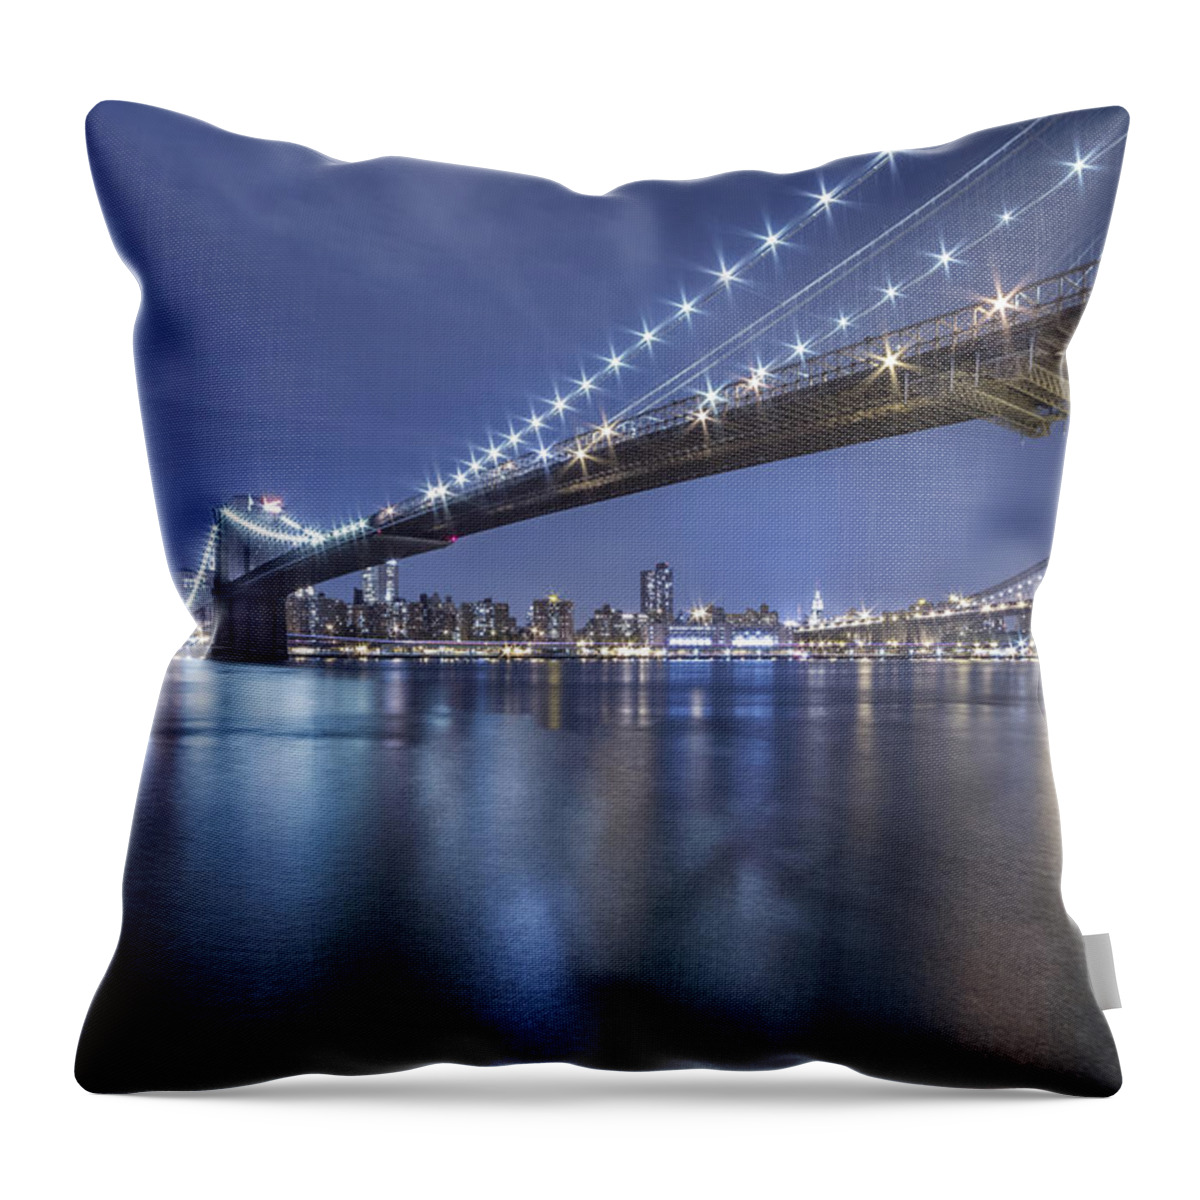 Kremsdorf Throw Pillow featuring the photograph Into The Arms Of The Night by Evelina Kremsdorf